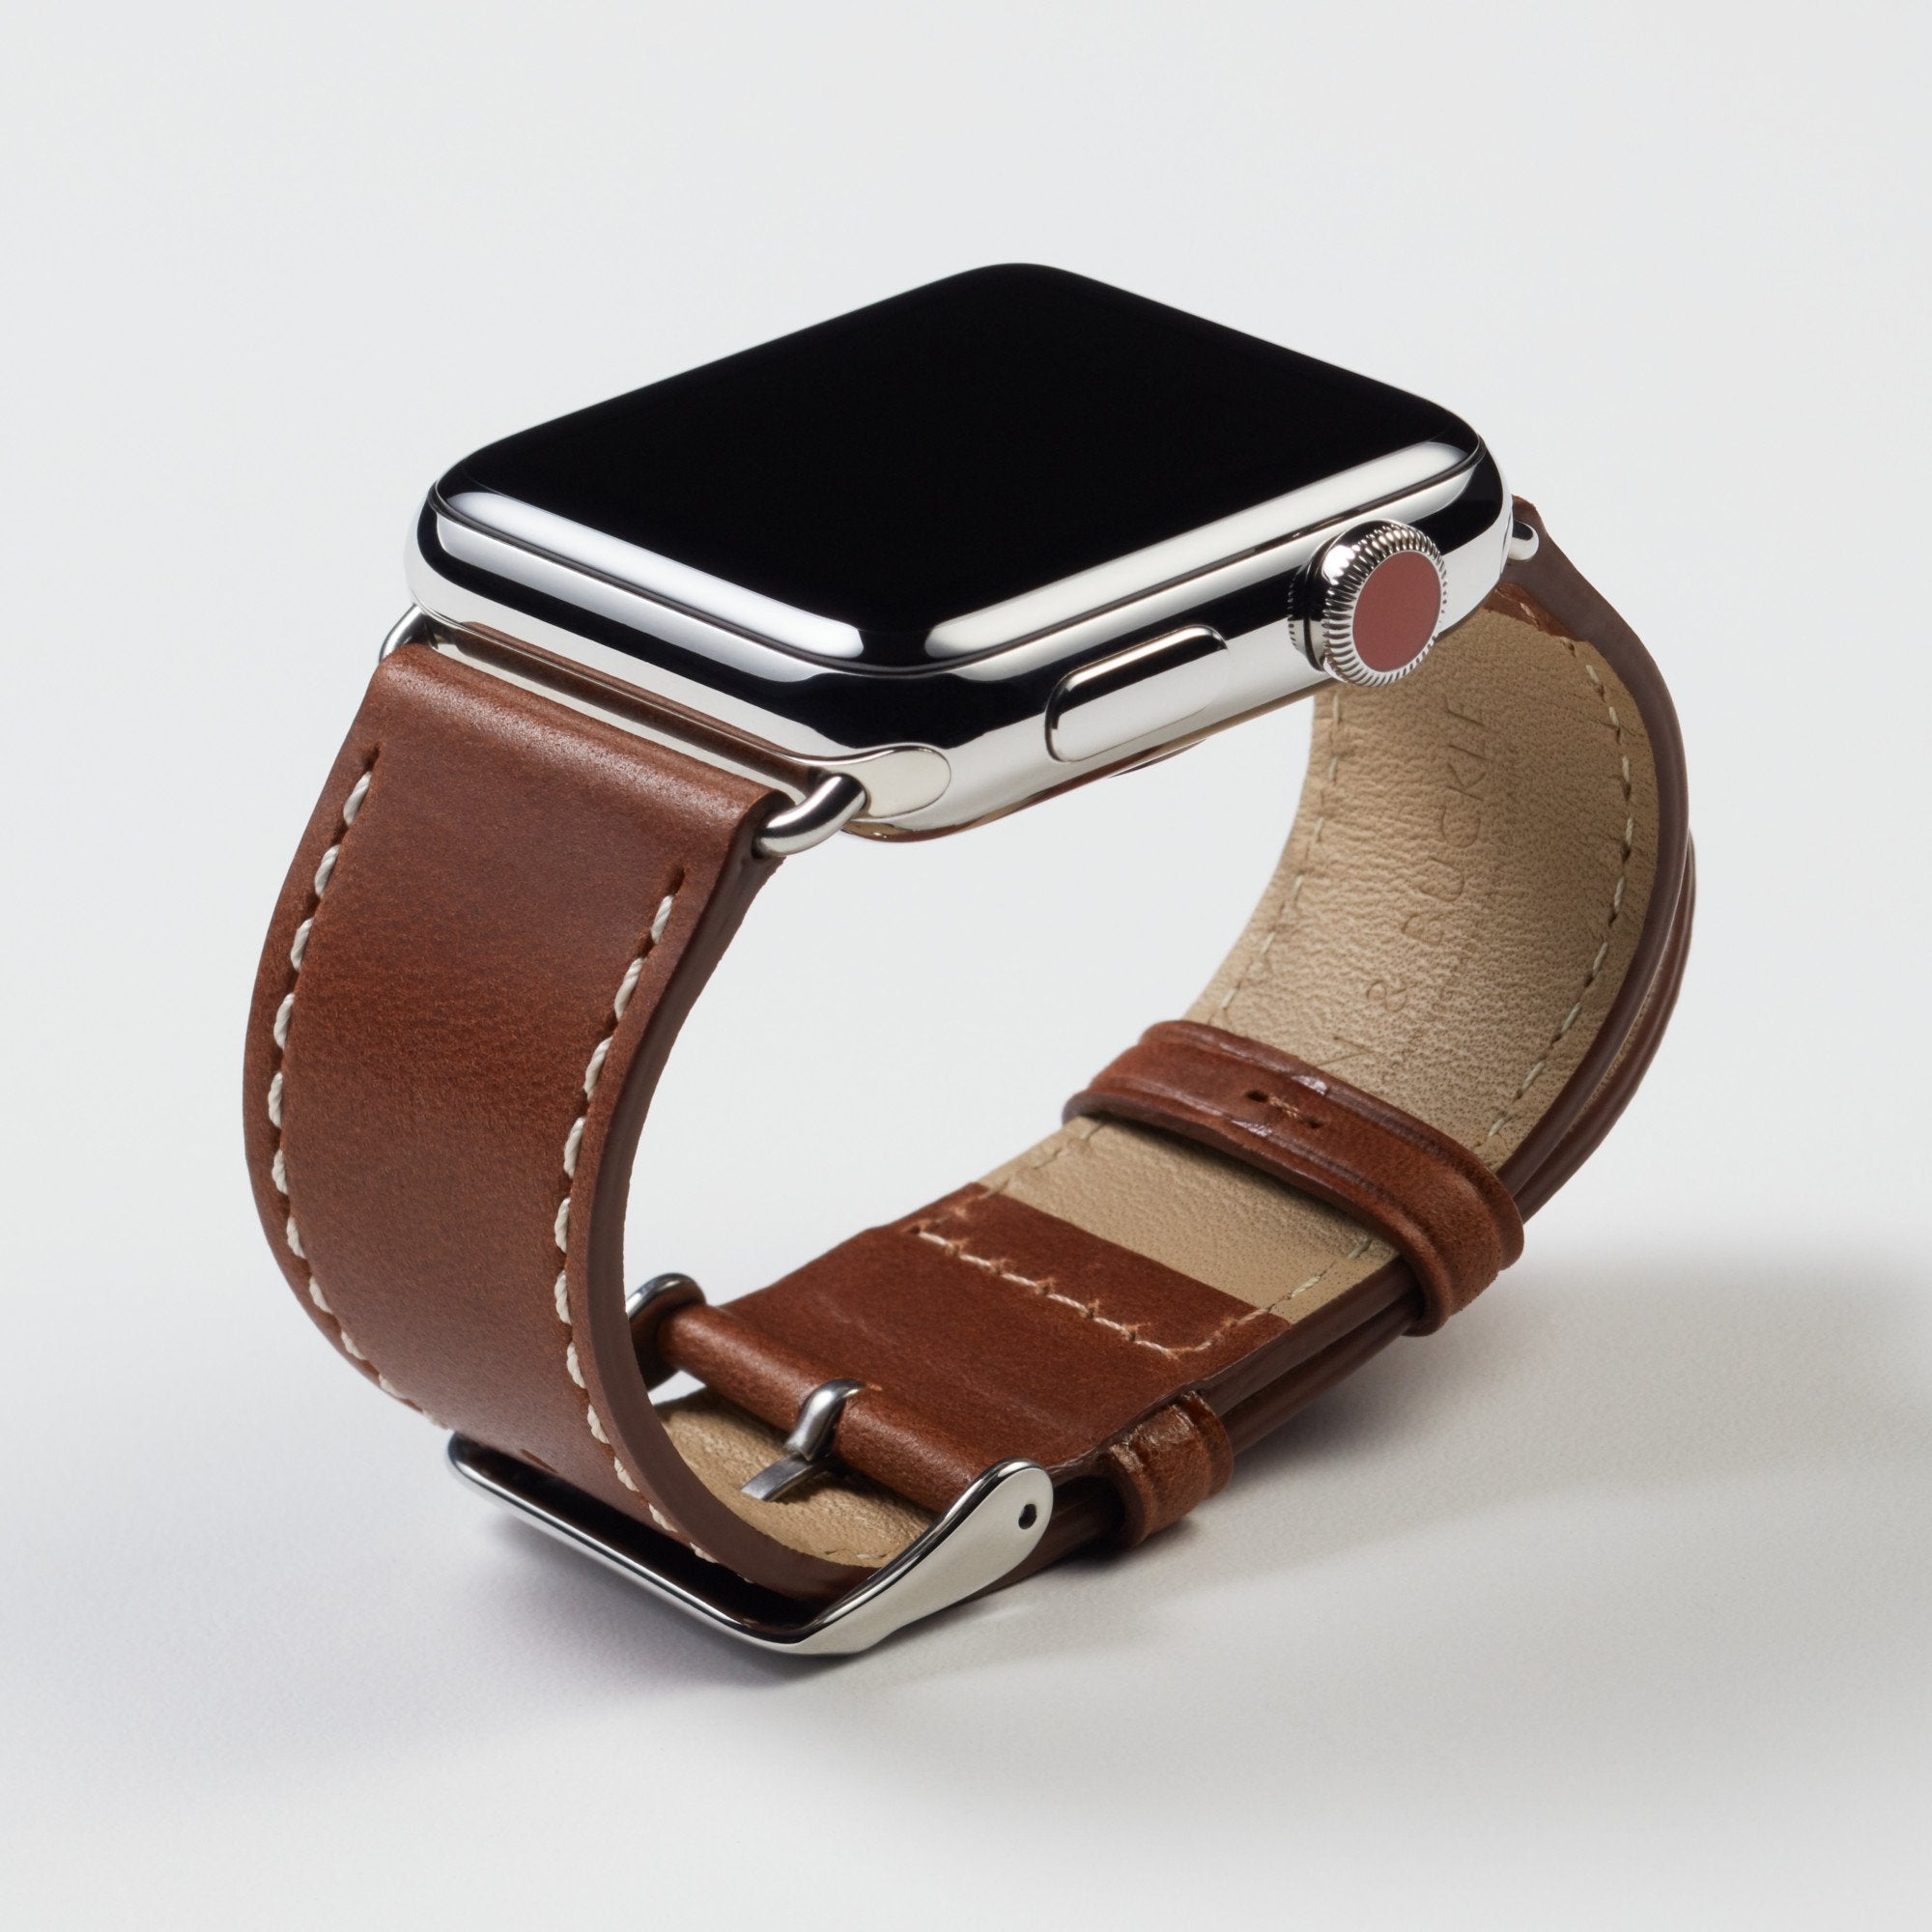 Pin and Buckle Apple Watch Bands - Full Grain Vegetable Tanned Leather - Luxe - Chestnut Brown - Silver